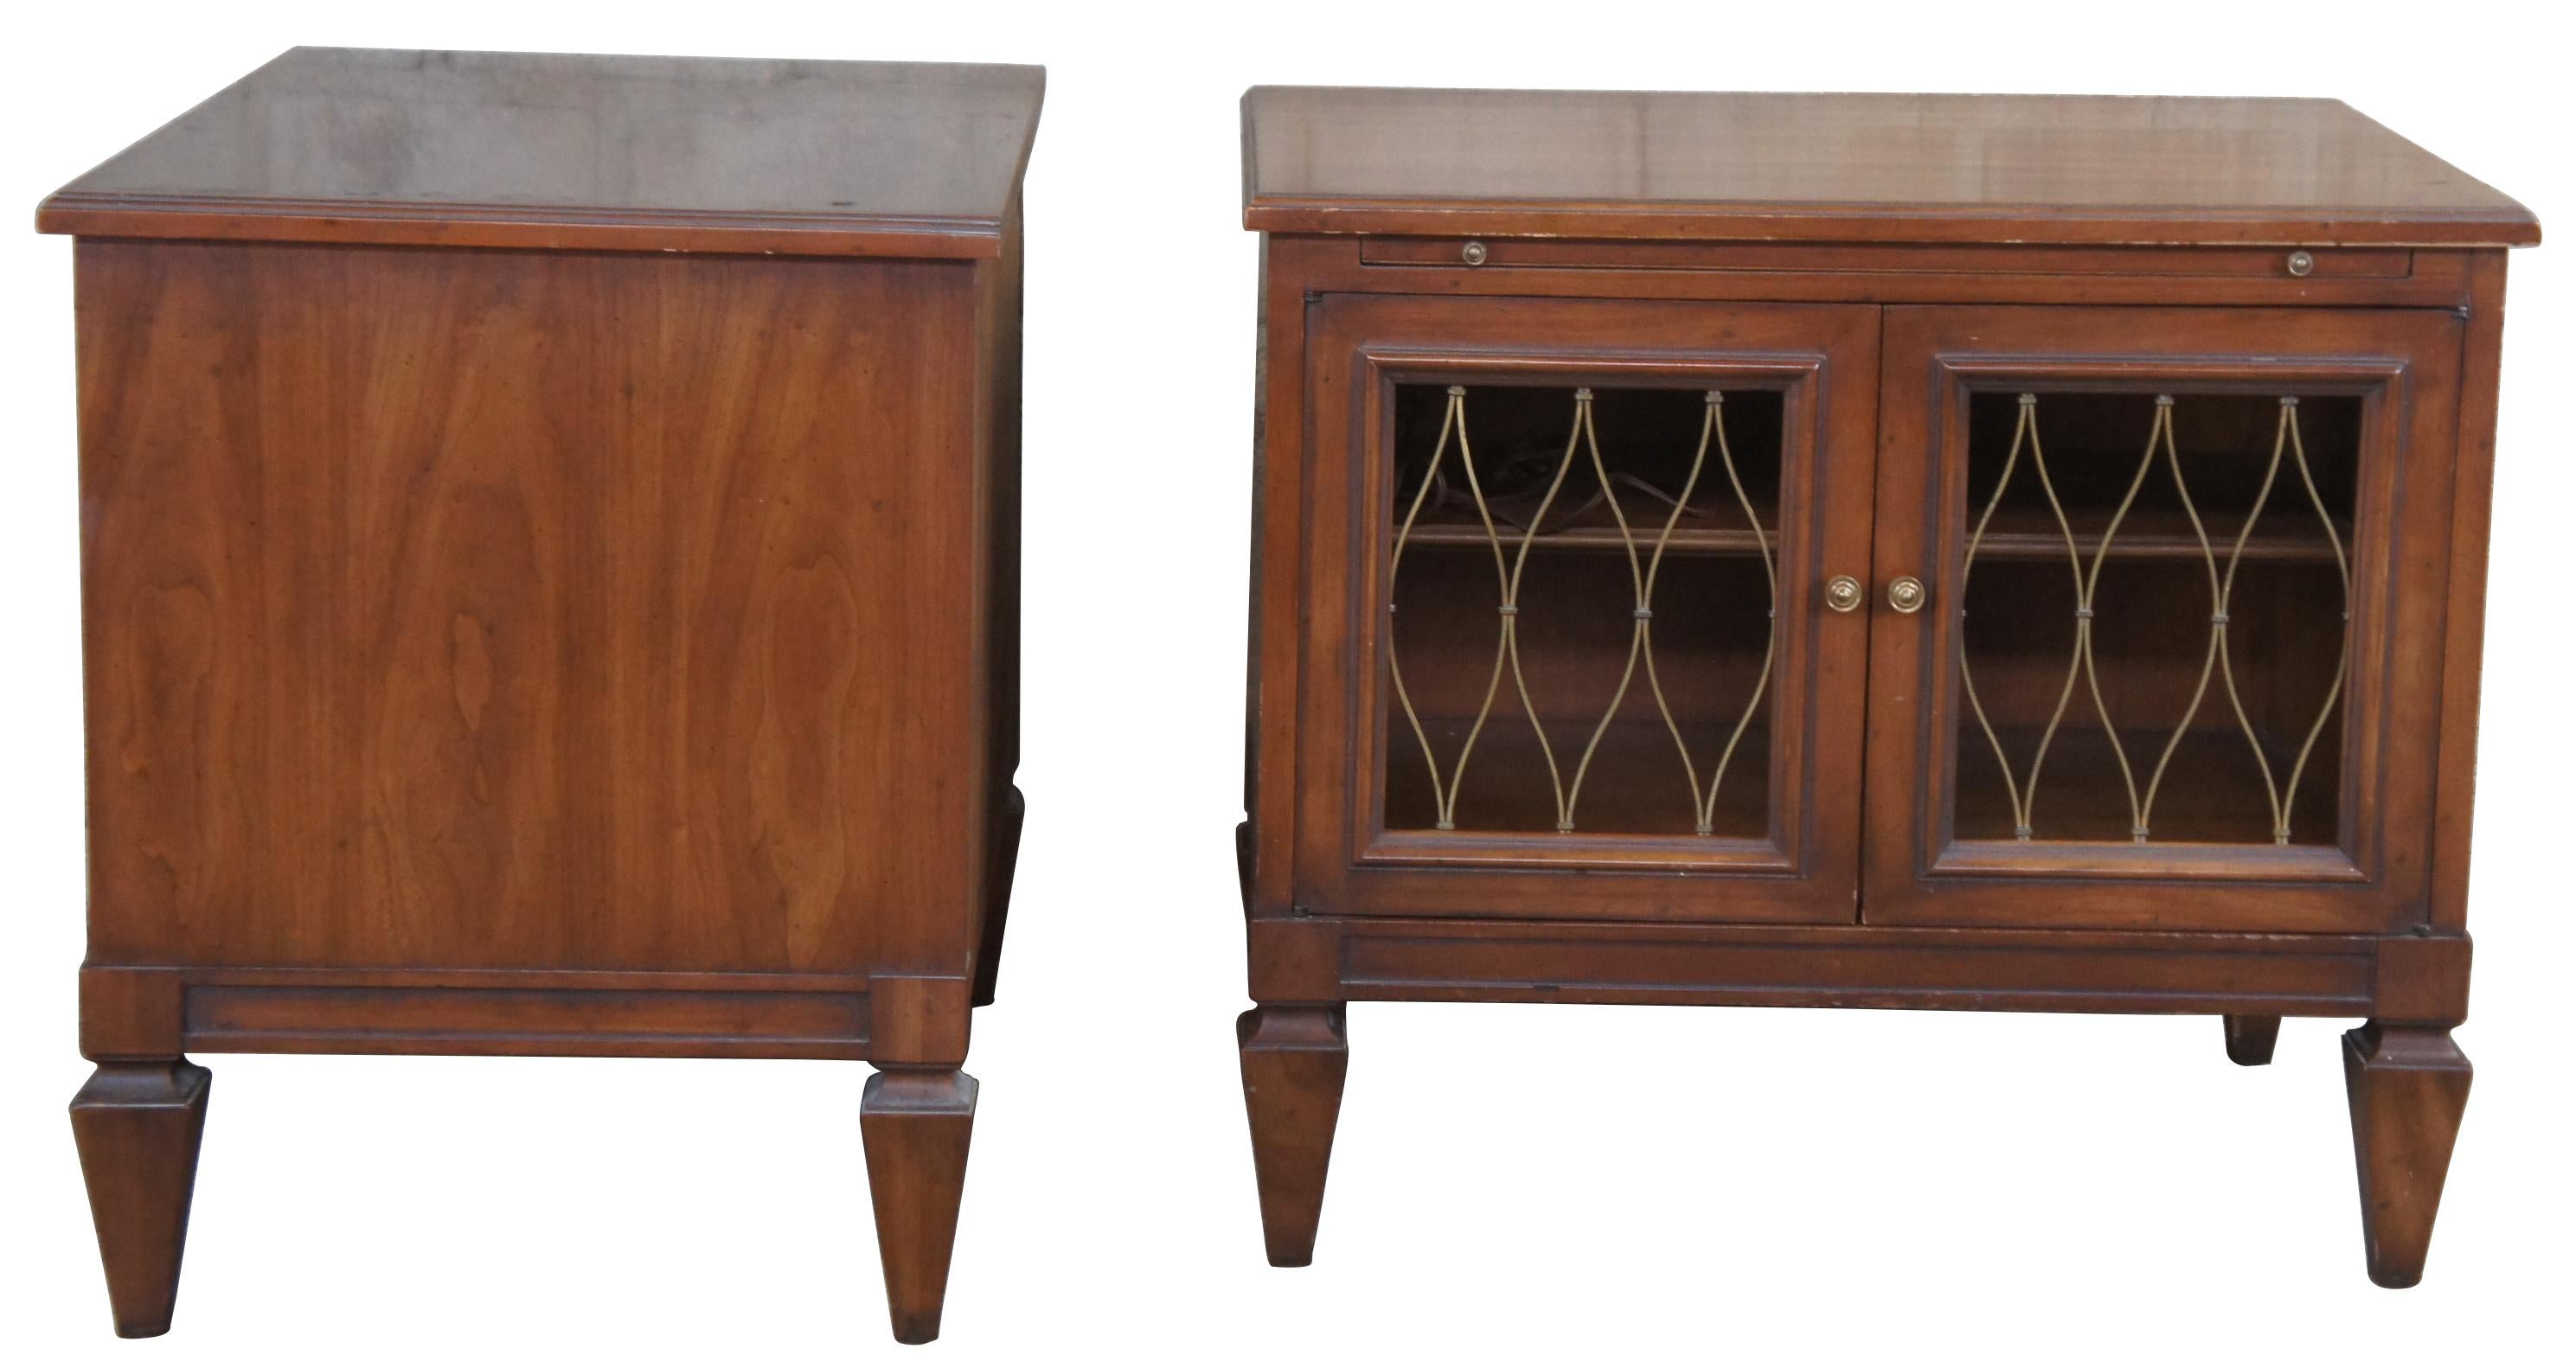 Circa 1960s Drexel Heritage Movanti Mediterranean collection nightstand/ side tables,14-172-30. Drawing inspiration from early Renaissance, Italian, classical and other European designs. A rectangular form made from fruitwood with brass grille doors